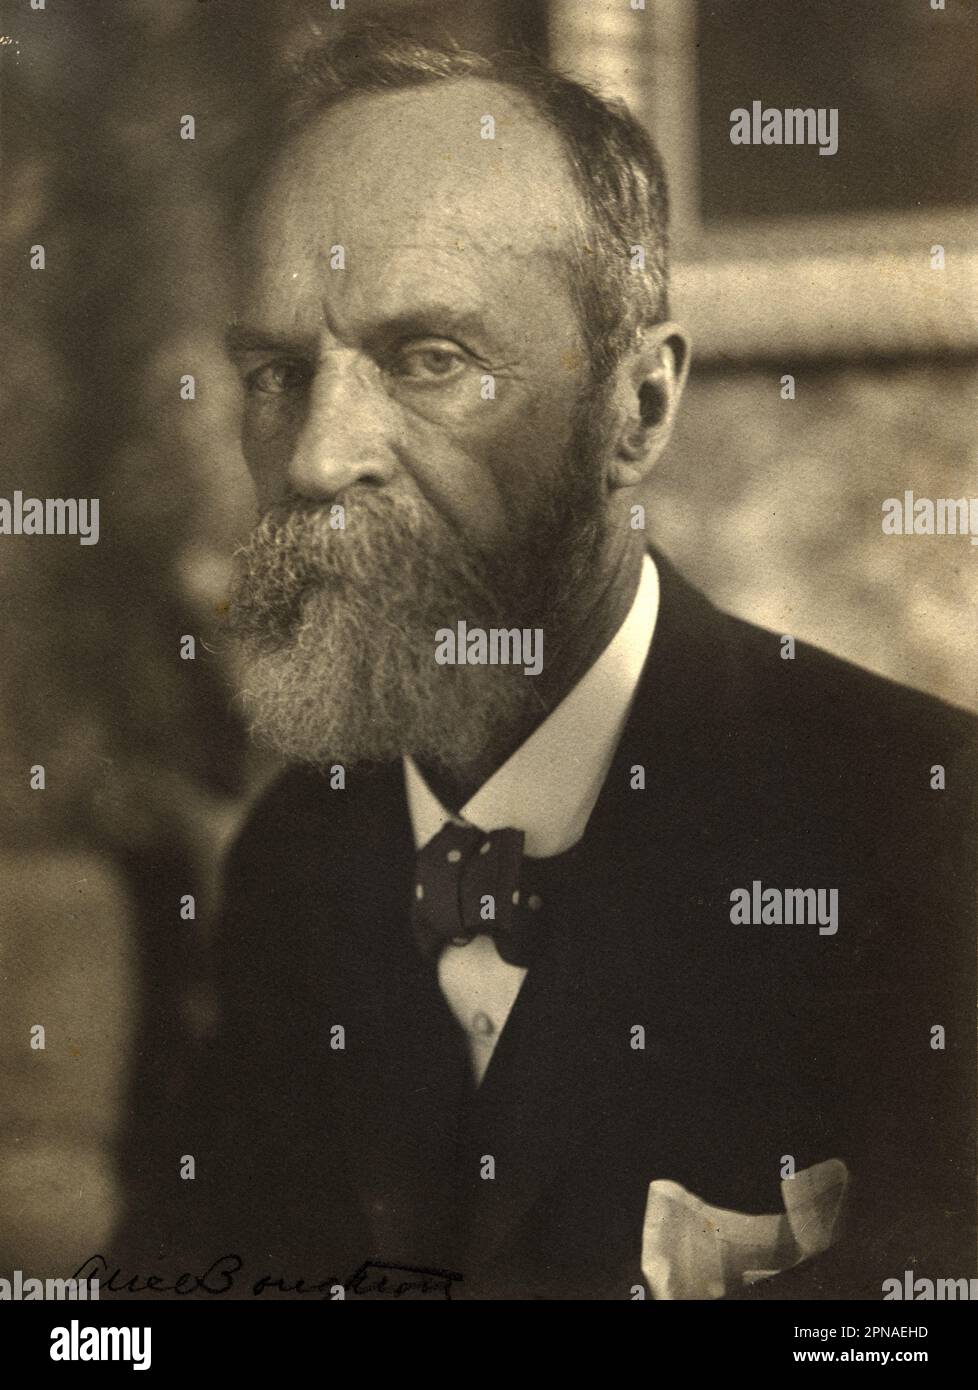 Vintage portrait of the American philosopher and psychologist, William James (1842-1910) by Alice Boughton c. 1907 Stock Photo